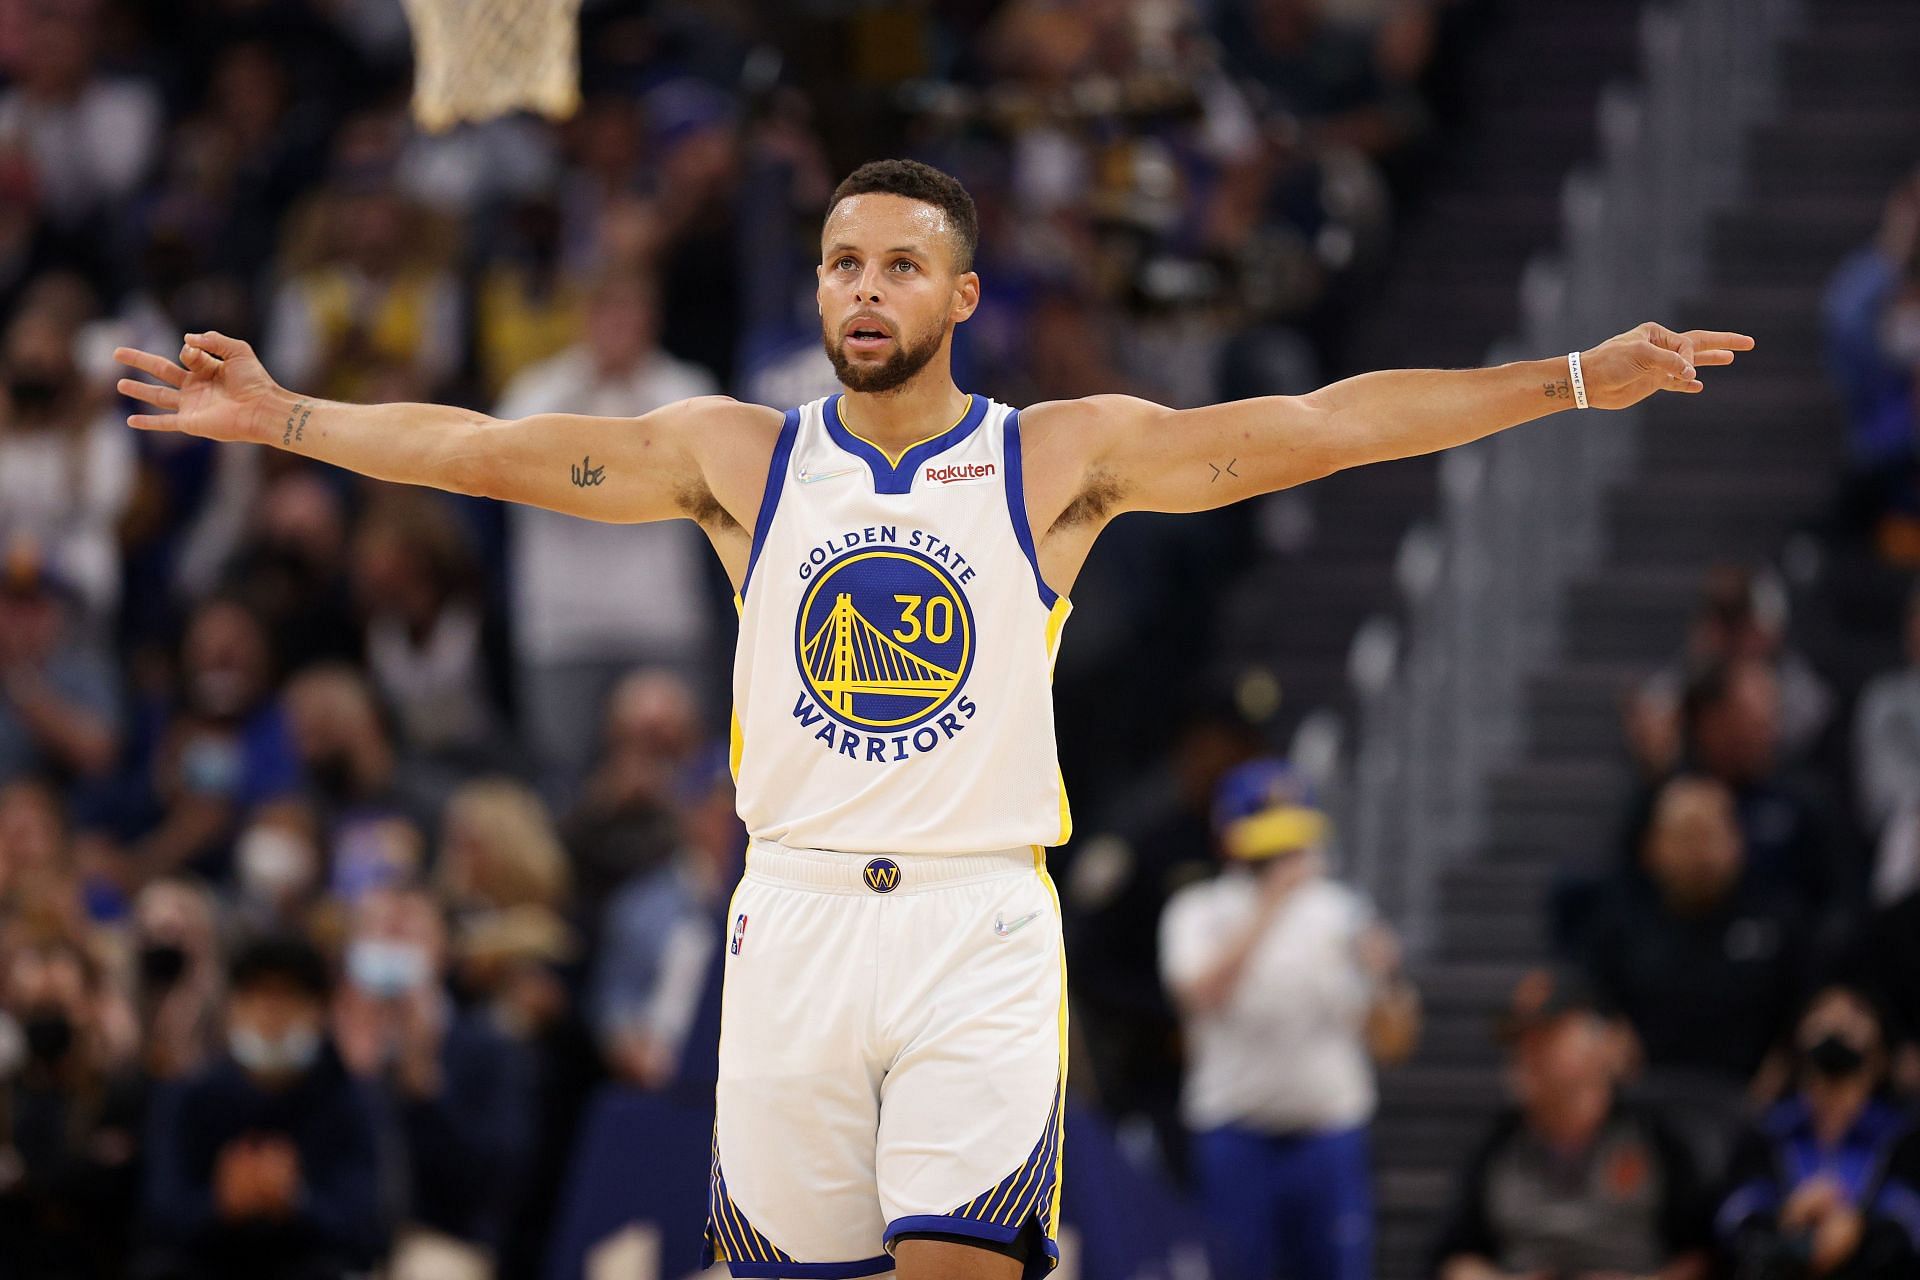 Steph Curry was the scoring champion of the 2020-21 NBA season